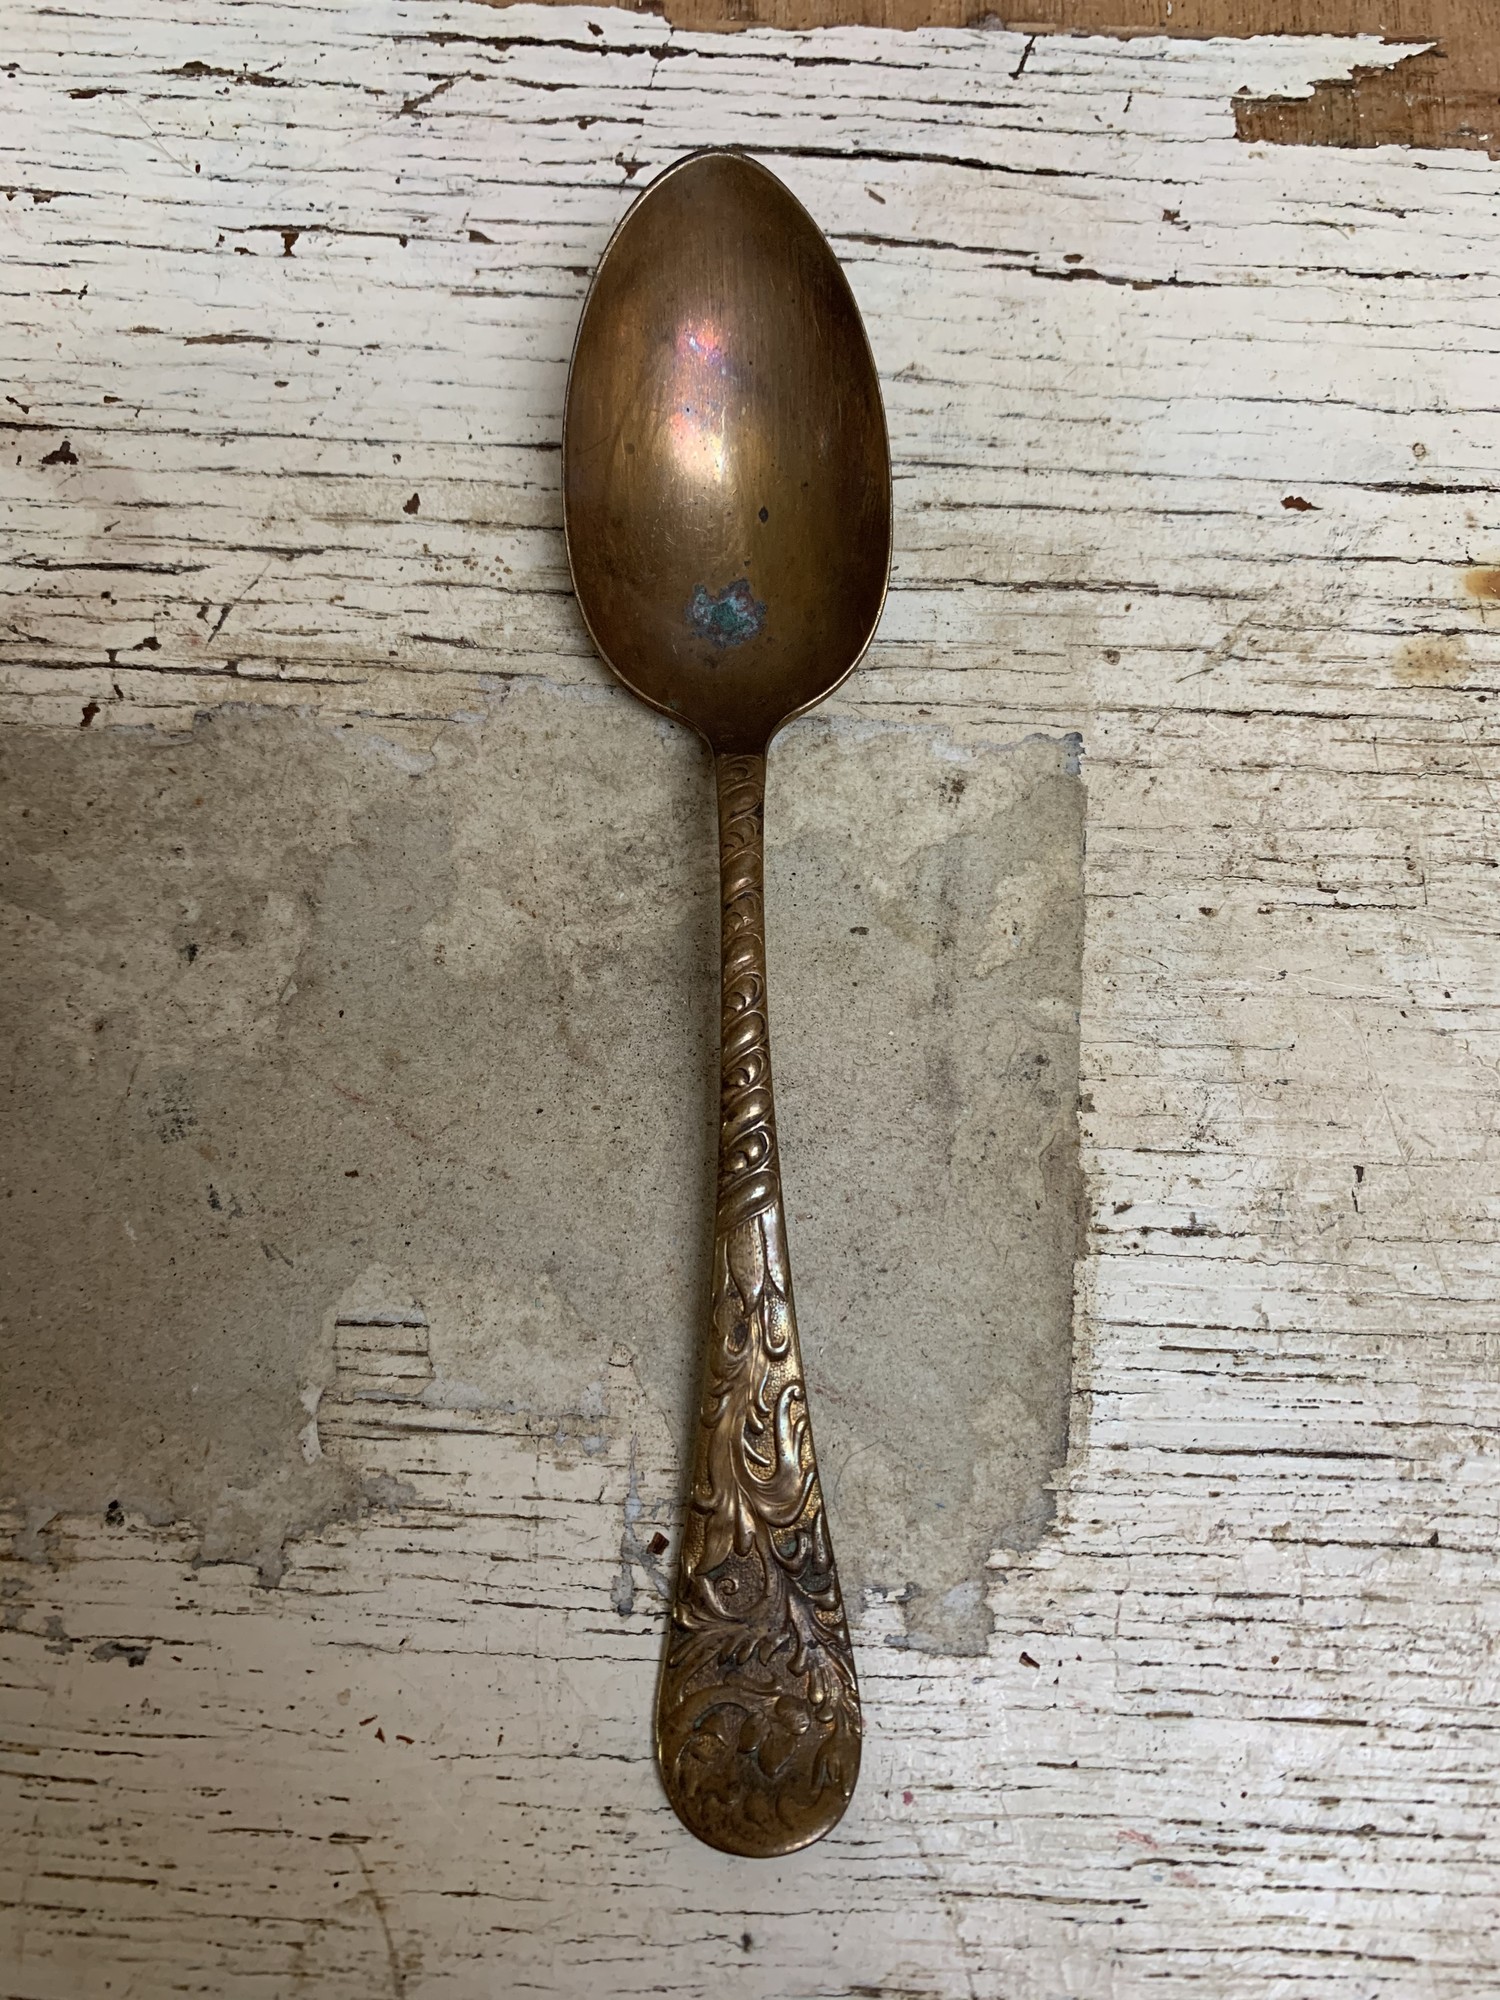 This awesome piece is in good antique condition. Needs some light cleaning. Please make sure to look at all the pictures for a closer visual and an item condition.
Measures approx. 6'' long.
Thank you.